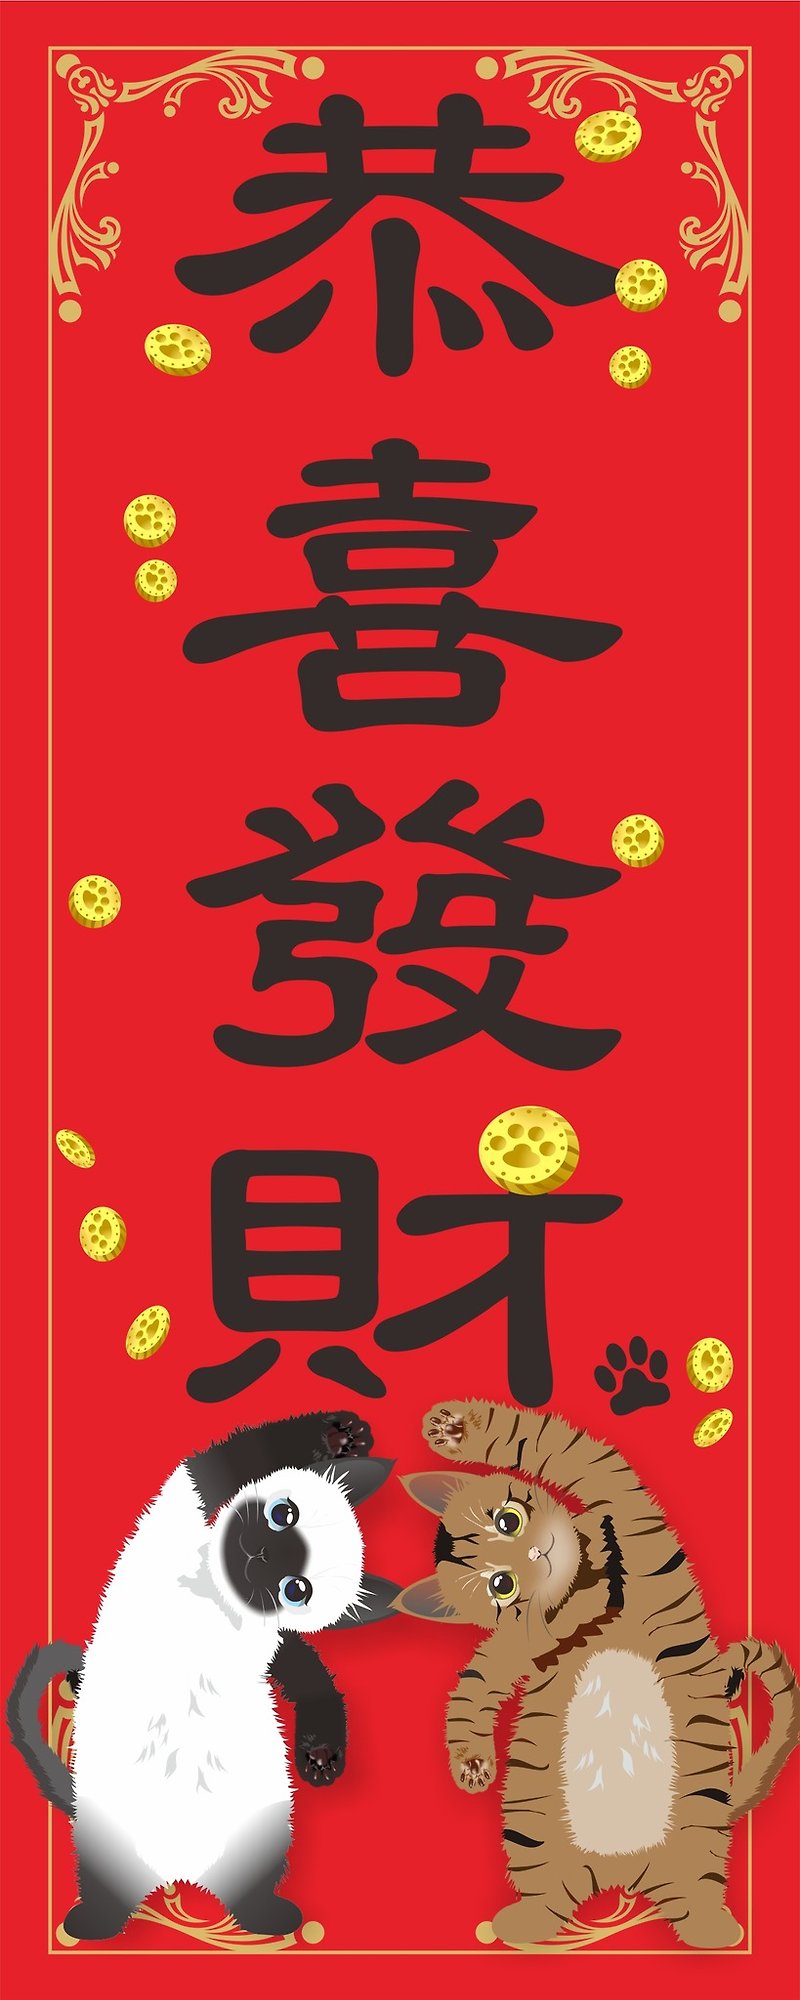 New Year. Cat. Couplets Kung Hei Fat Choi - Chinese New Year - Waterproof Material Red